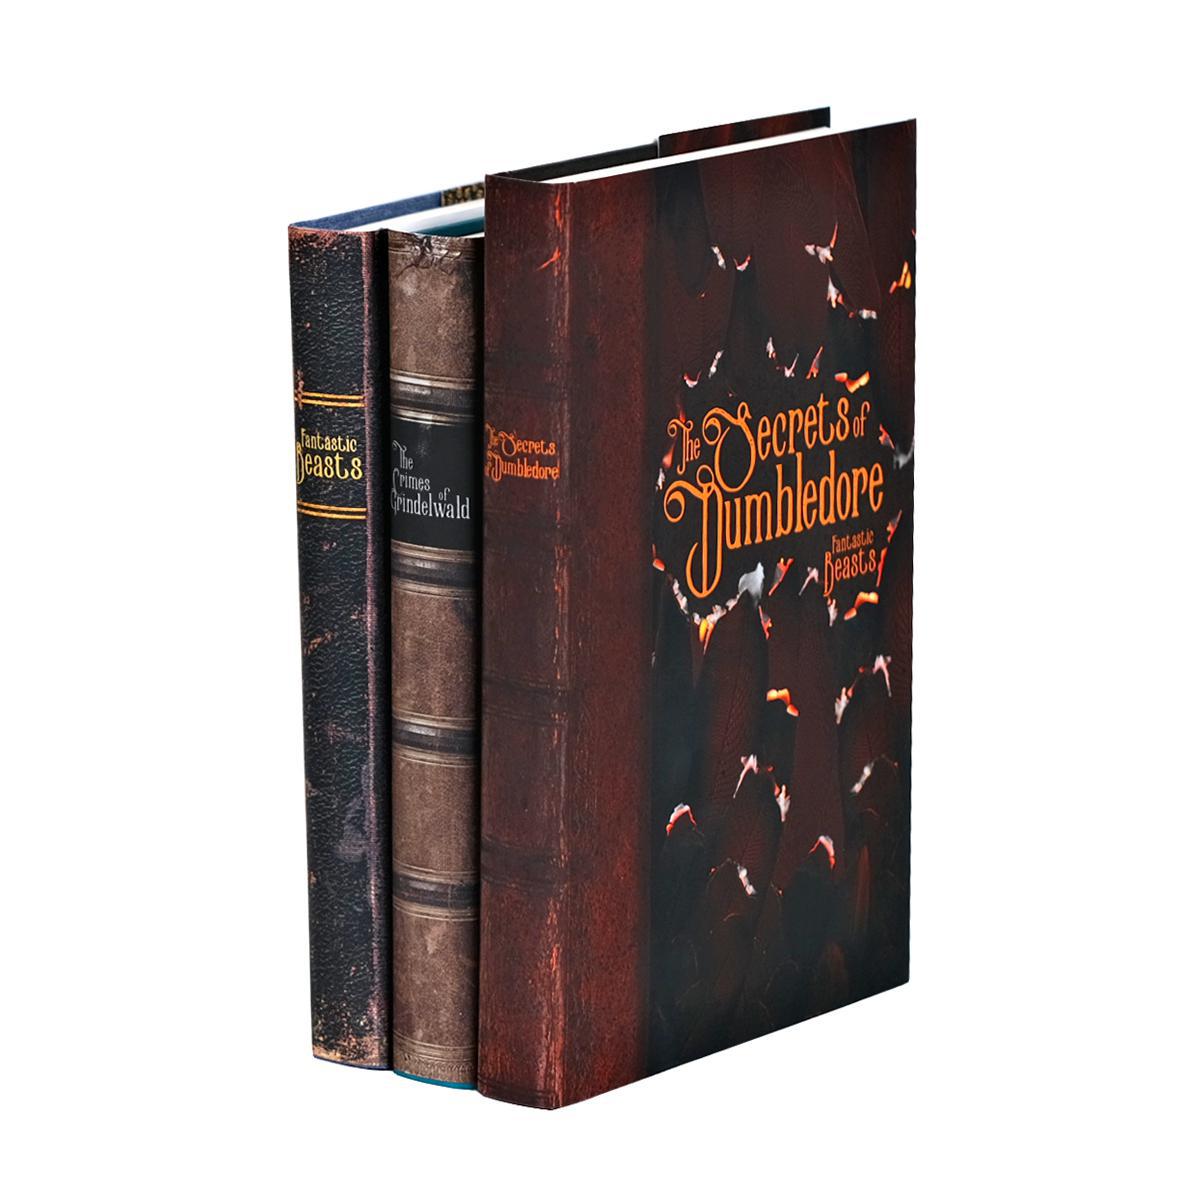  Juniper Books - Fantastic Beasts and Where to Find Them -  Original Screenplay Set - 2 Volume Hardcover Book Set with Custom Book  Covers : Toys & Games